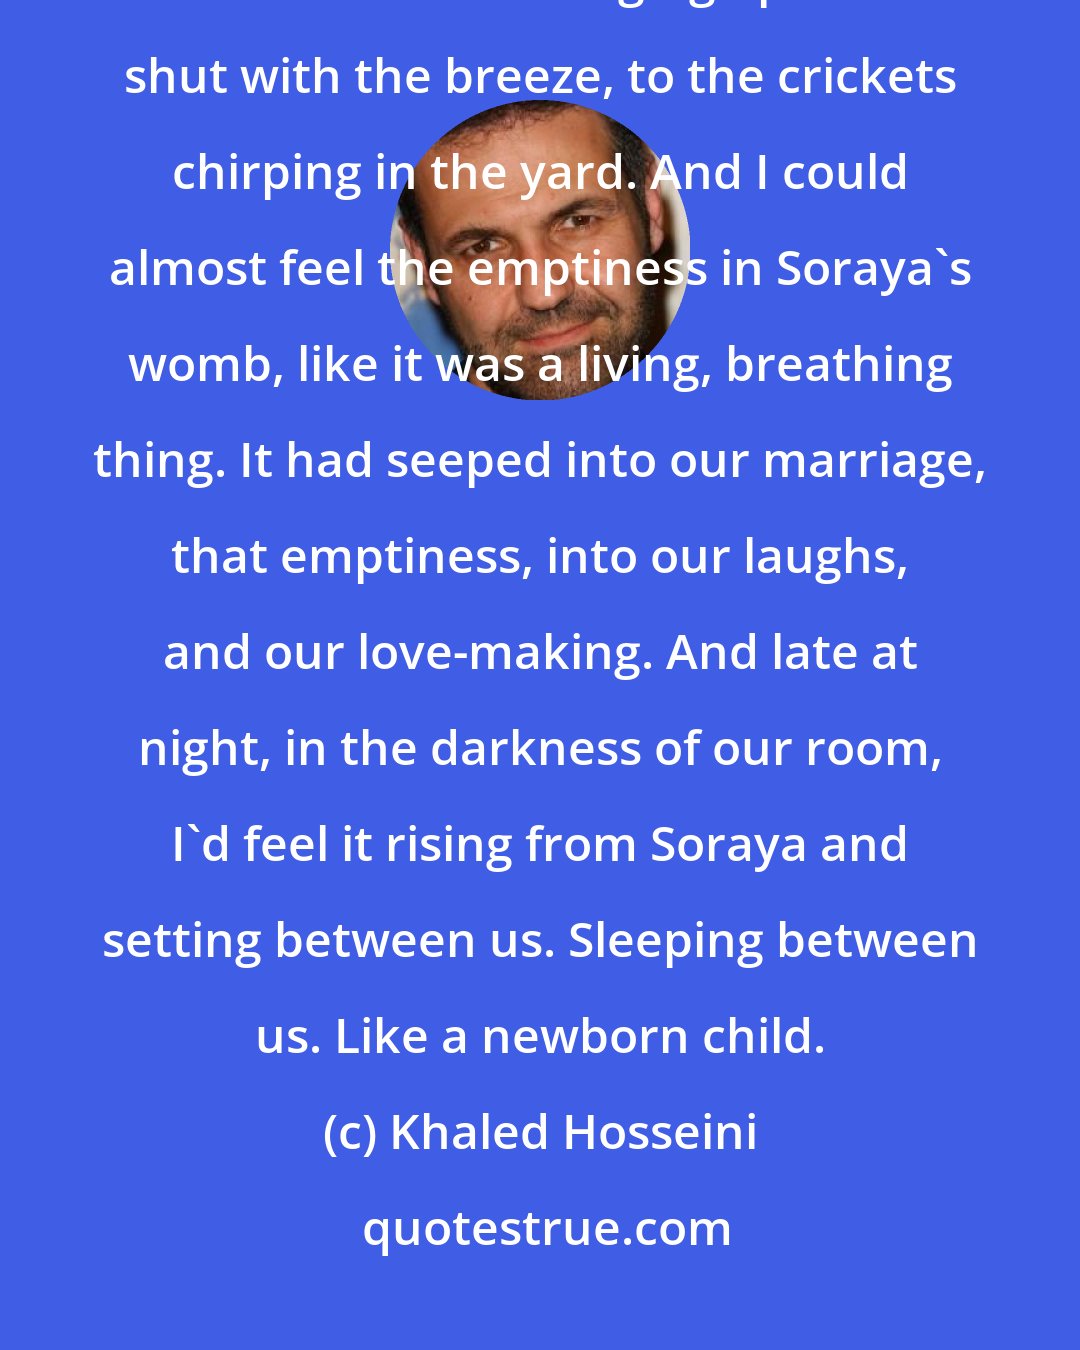 Khaled Hosseini: Sometimes, Soraya Sleeping next to me, I lay in bed and listened to the screen door swinging open and shut with the breeze, to the crickets chirping in the yard. And I could almost feel the emptiness in Soraya's womb, like it was a living, breathing thing. It had seeped into our marriage, that emptiness, into our laughs, and our love-making. And late at night, in the darkness of our room, I'd feel it rising from Soraya and setting between us. Sleeping between us. Like a newborn child.